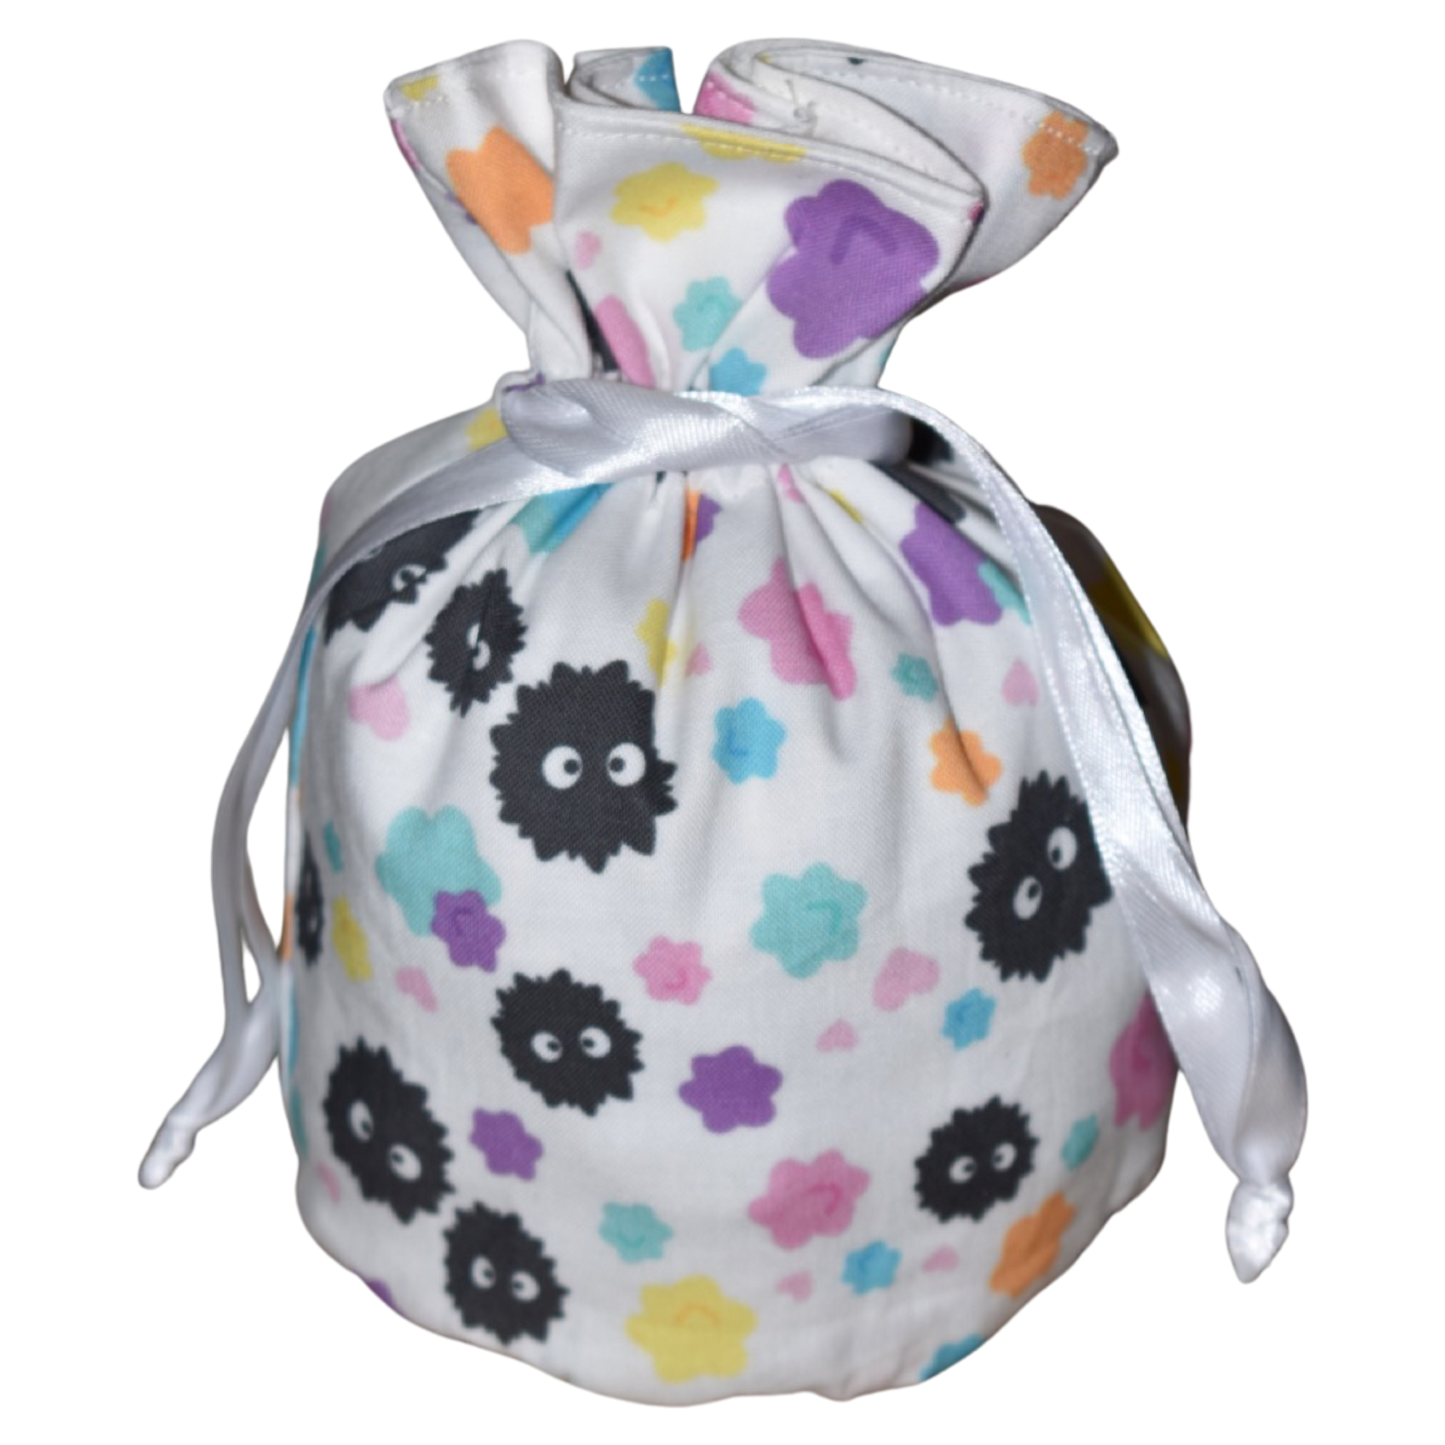 Sooty Puffs & Candy Dice Bag